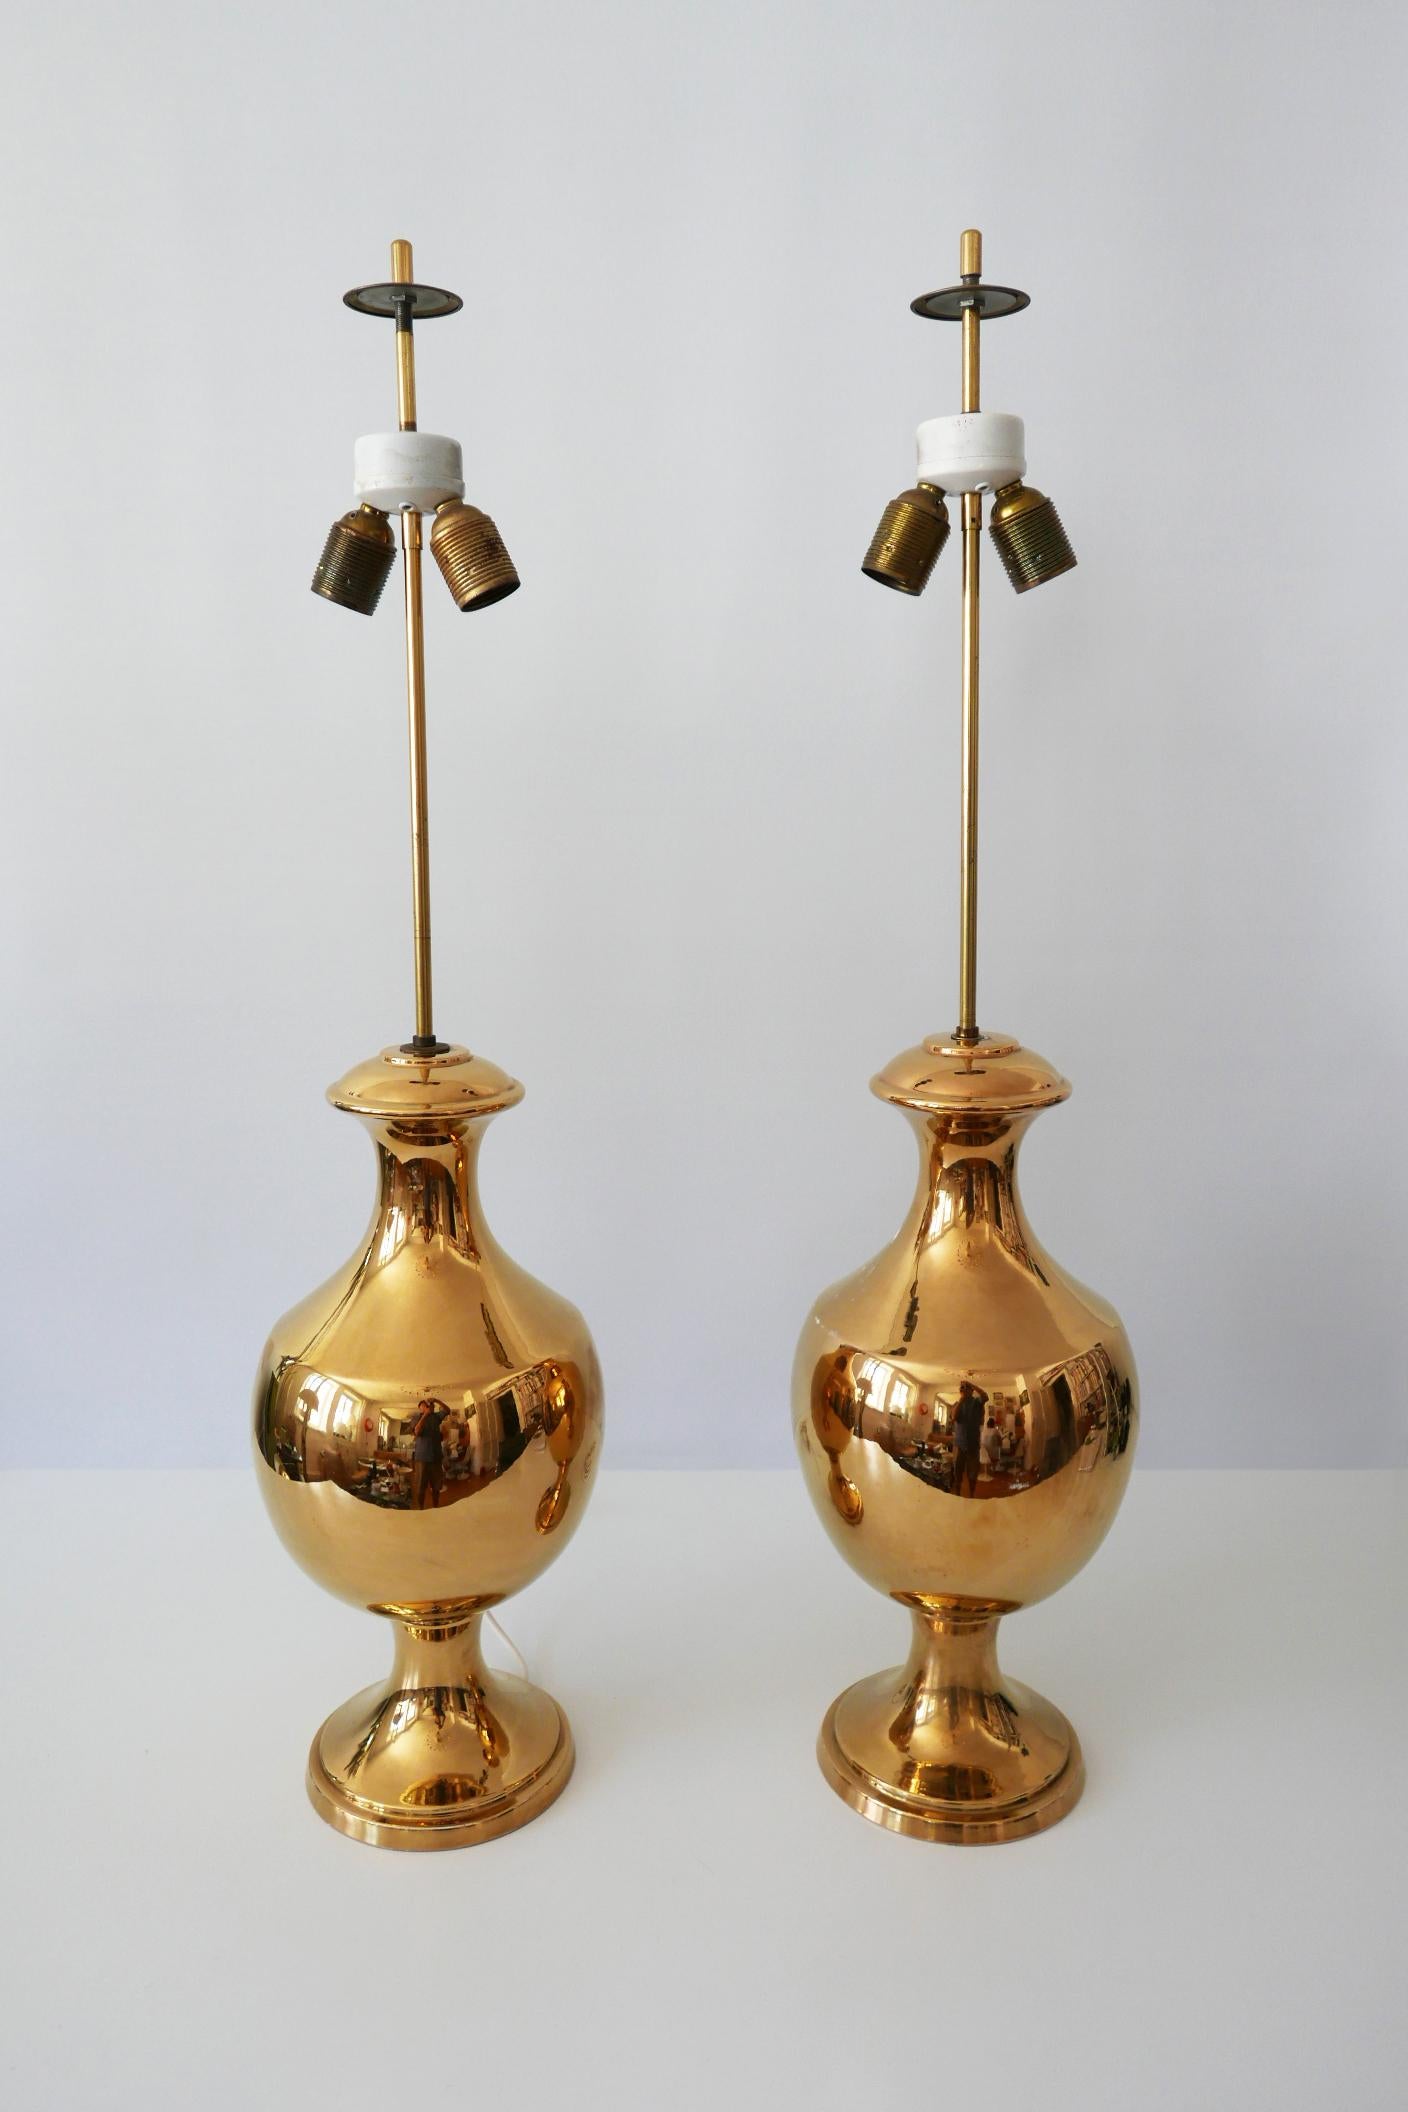 Italian Set of Two Huge Gold Glazed Ceramic Table Lamps by Behreno Firenze 1960s Italy For Sale